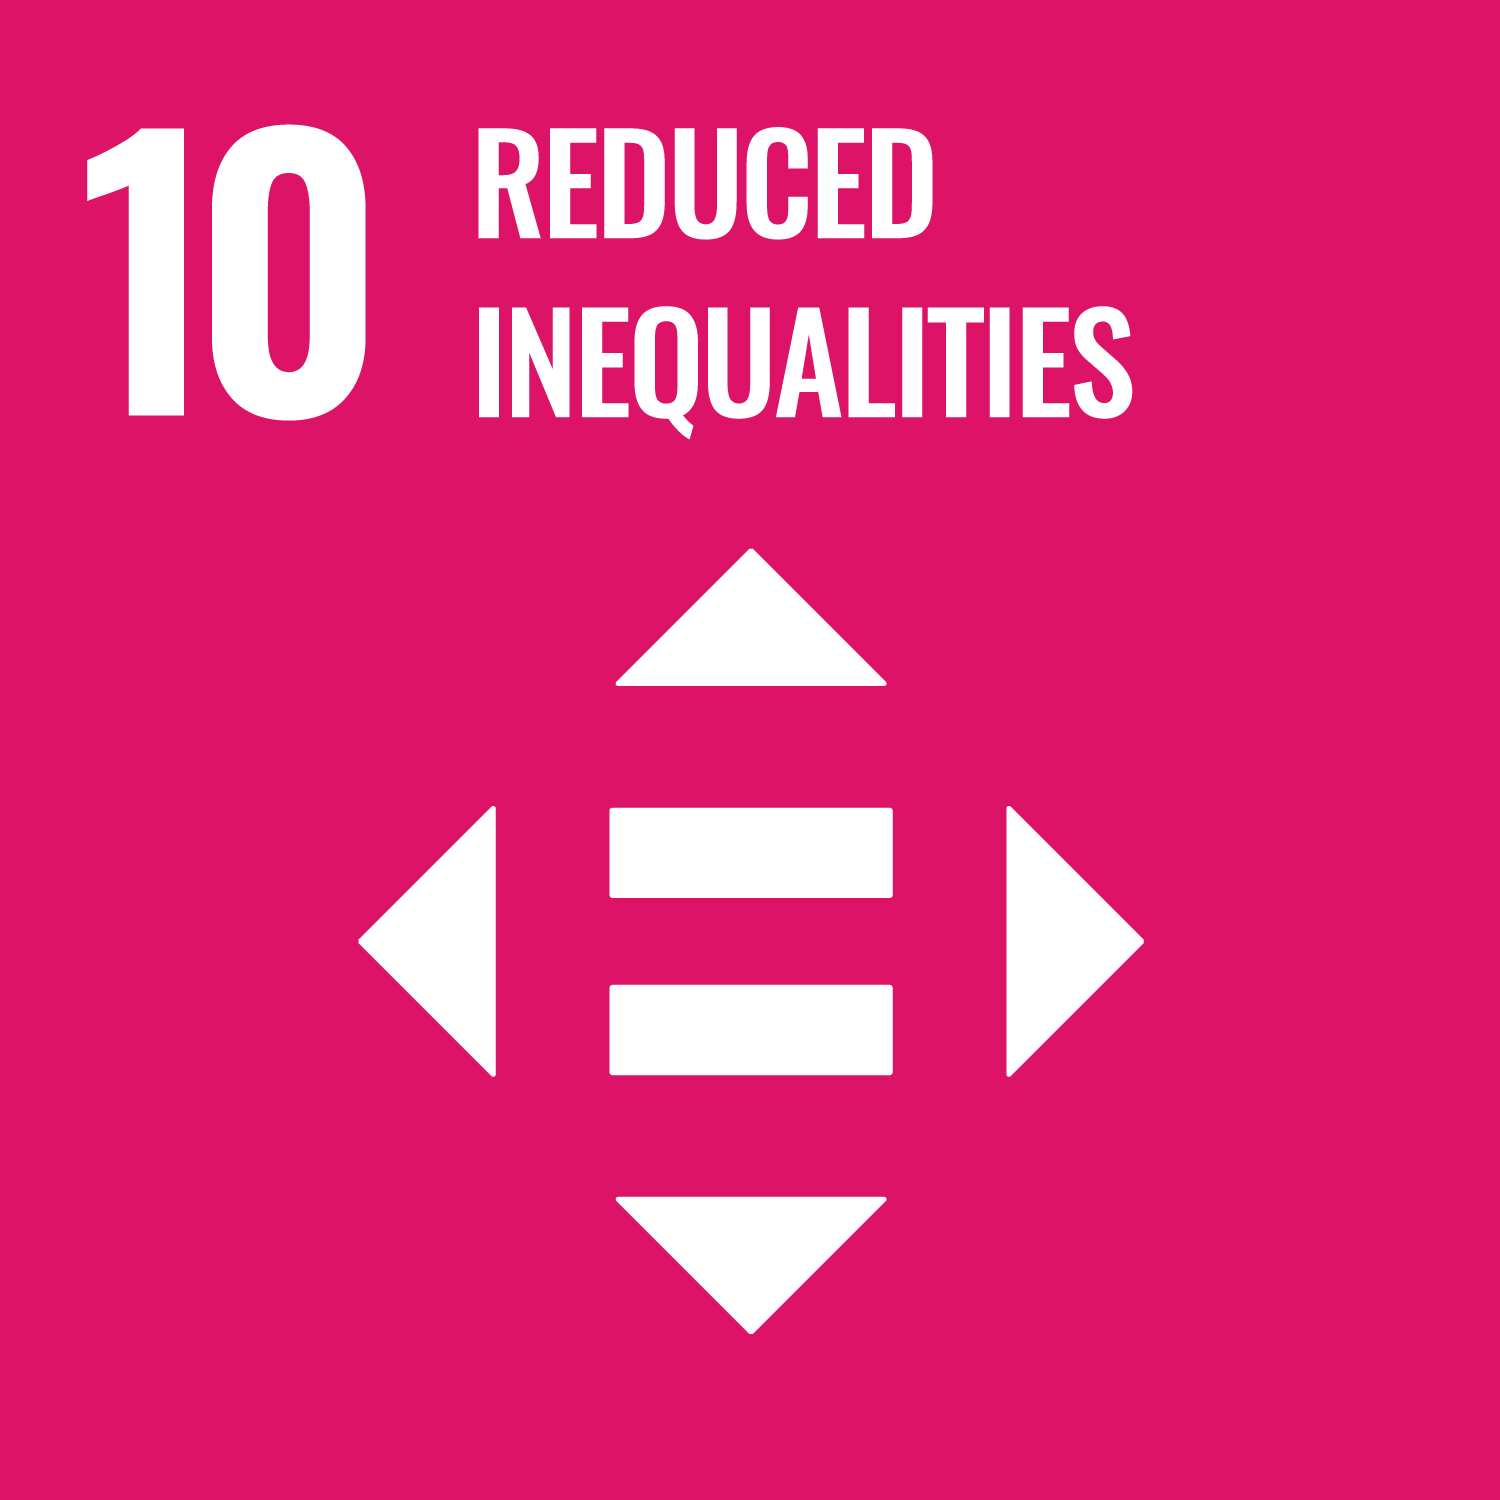 The Nordics and Sustainable Development Goal 10: Reduced Inequalities